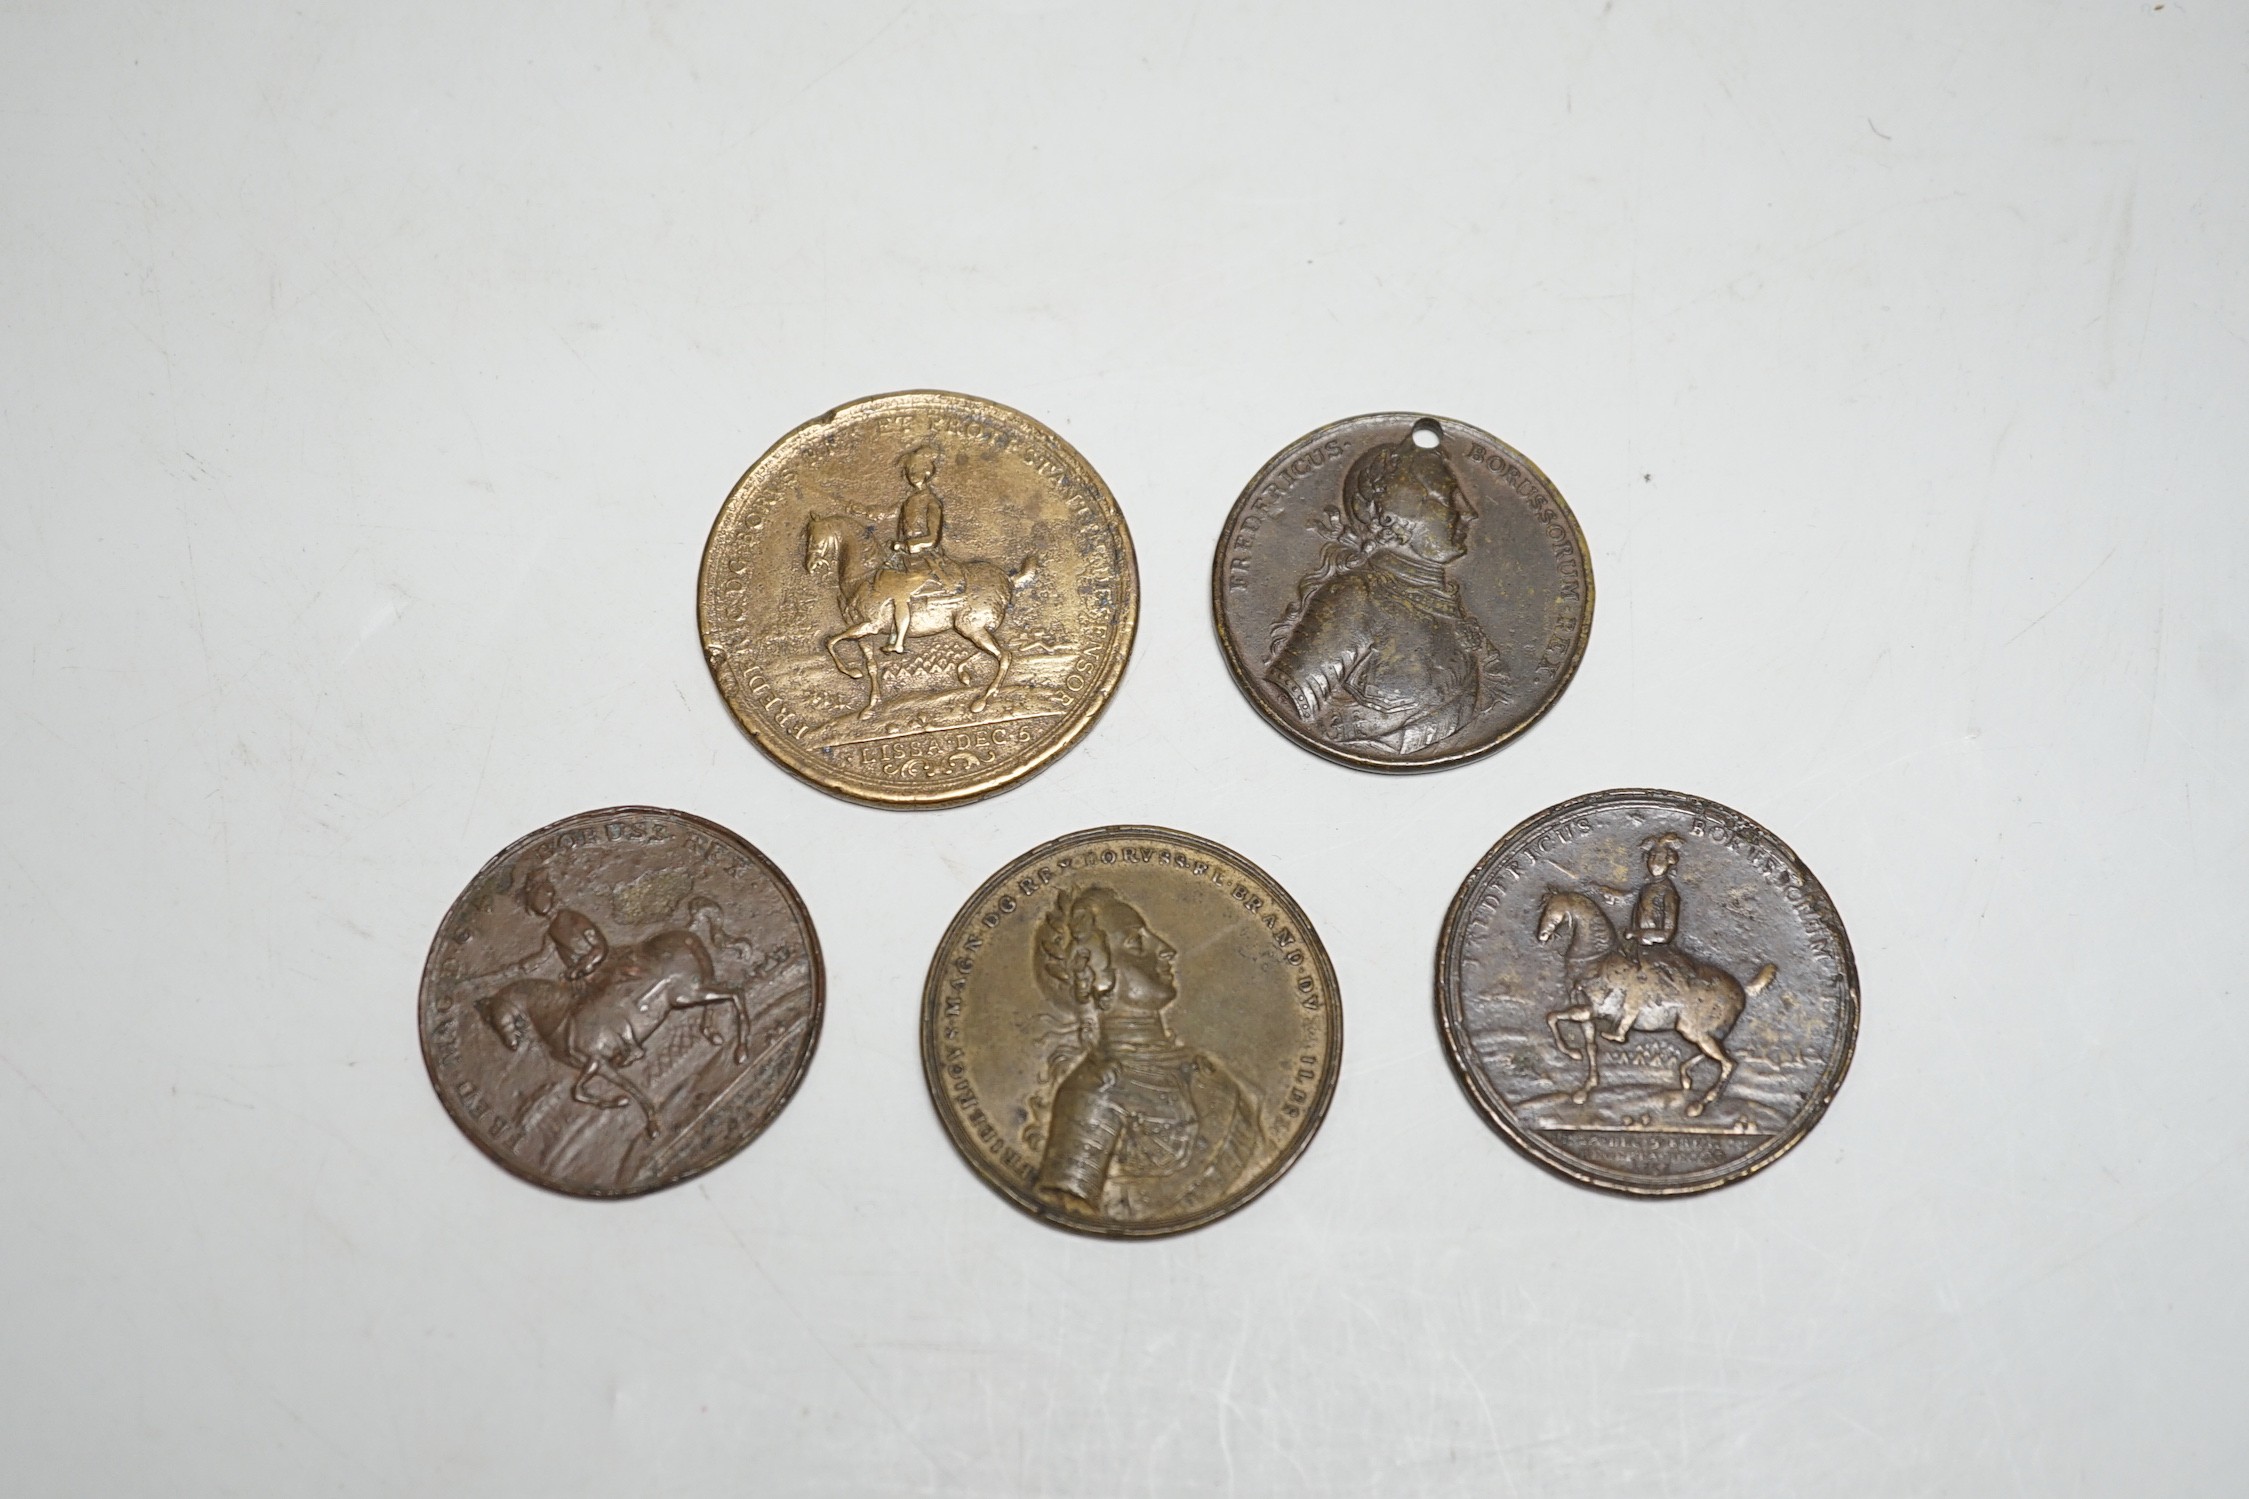 Five 18th century Prussia commemorative medals – a Frederick bronze medal 1757 (holed), three Battle of Rosbach and Lissa bronze medals 1757 and a Capture of Breslaw bronze medal 1757